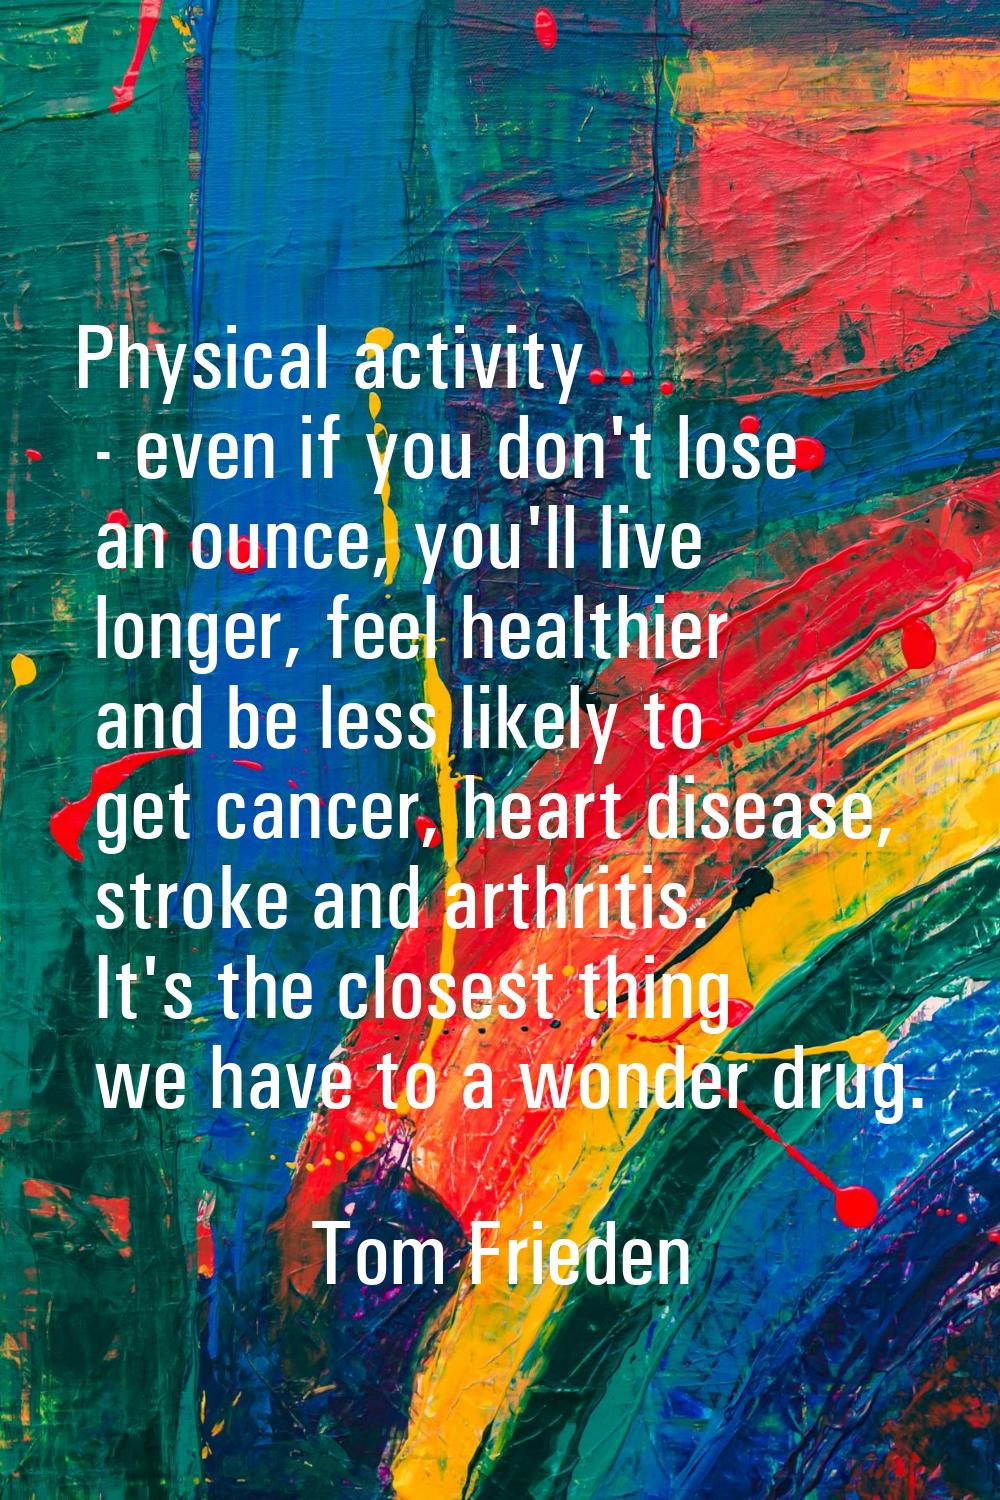 Physical activity - even if you don't lose an ounce, you'll live longer, feel healthier and be less